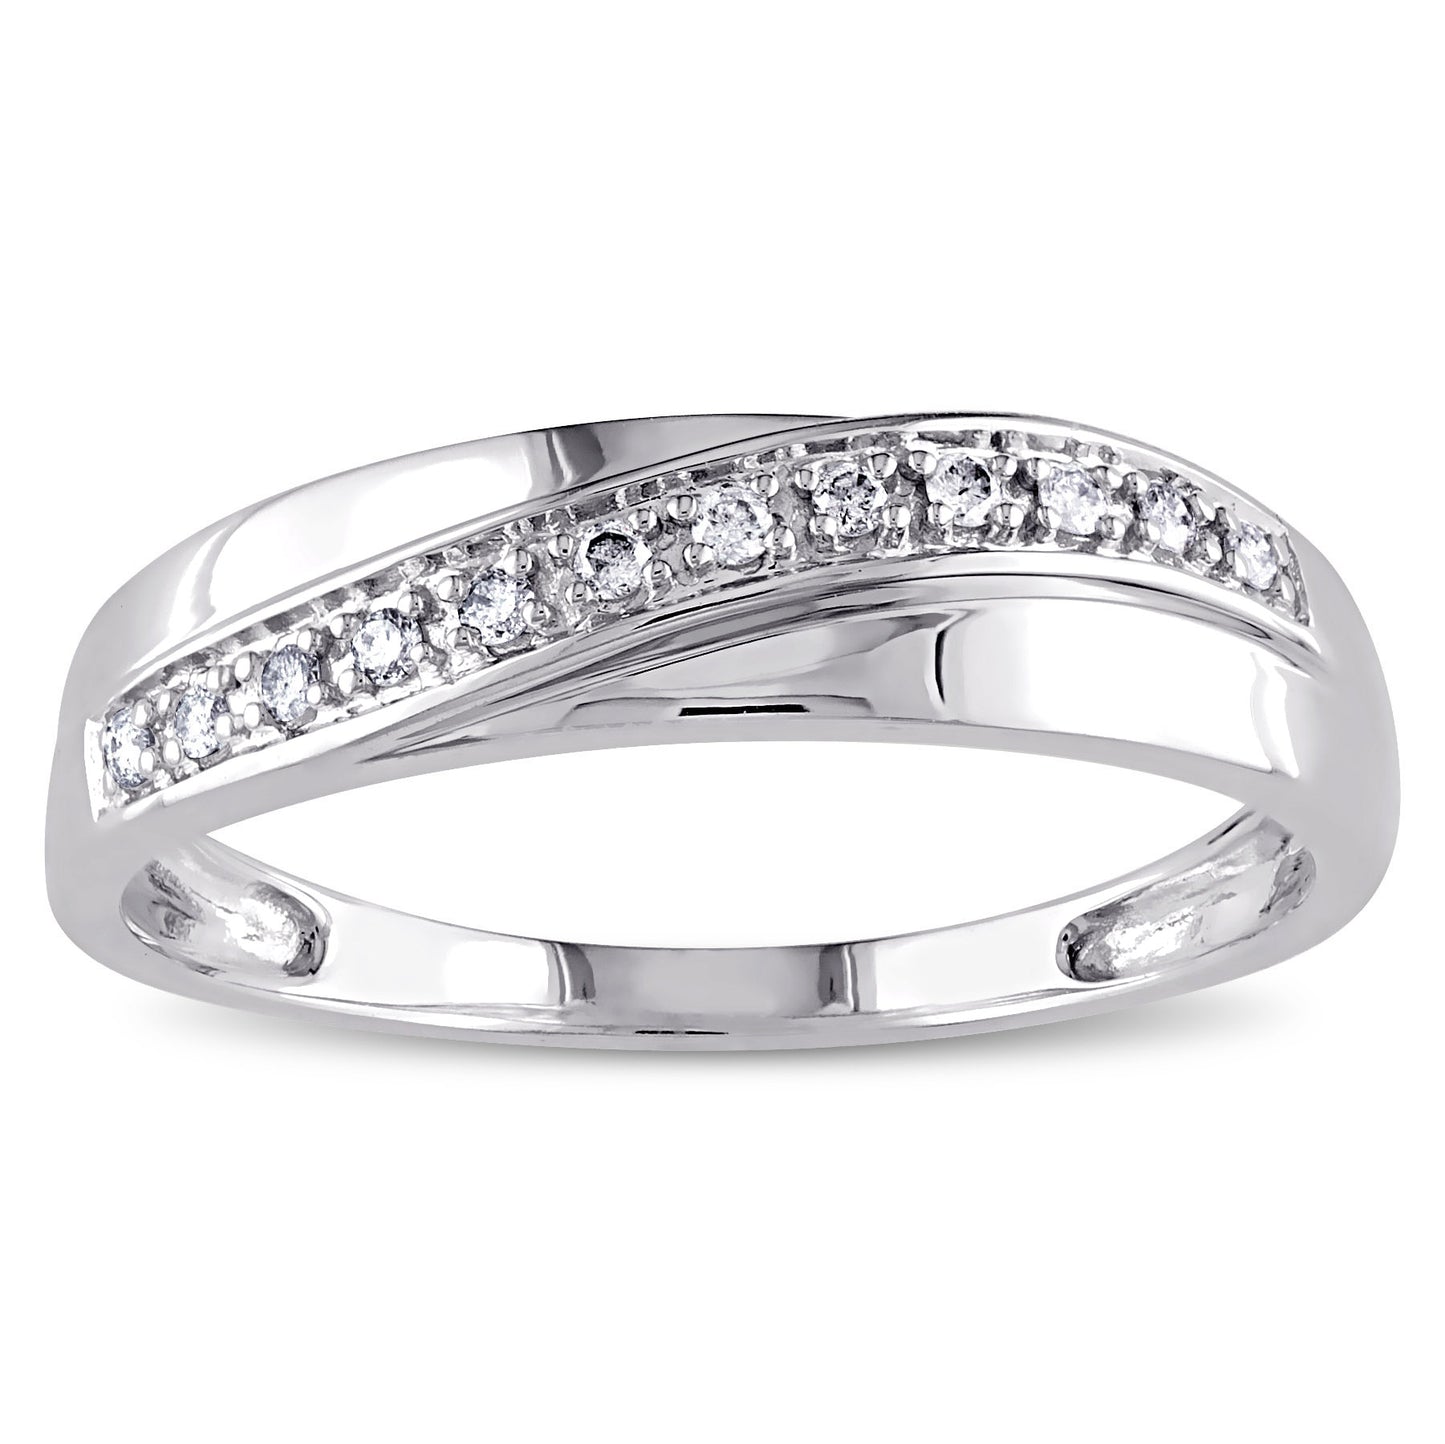 Julie Leah Crossover Diamond Band in 10k White Gold